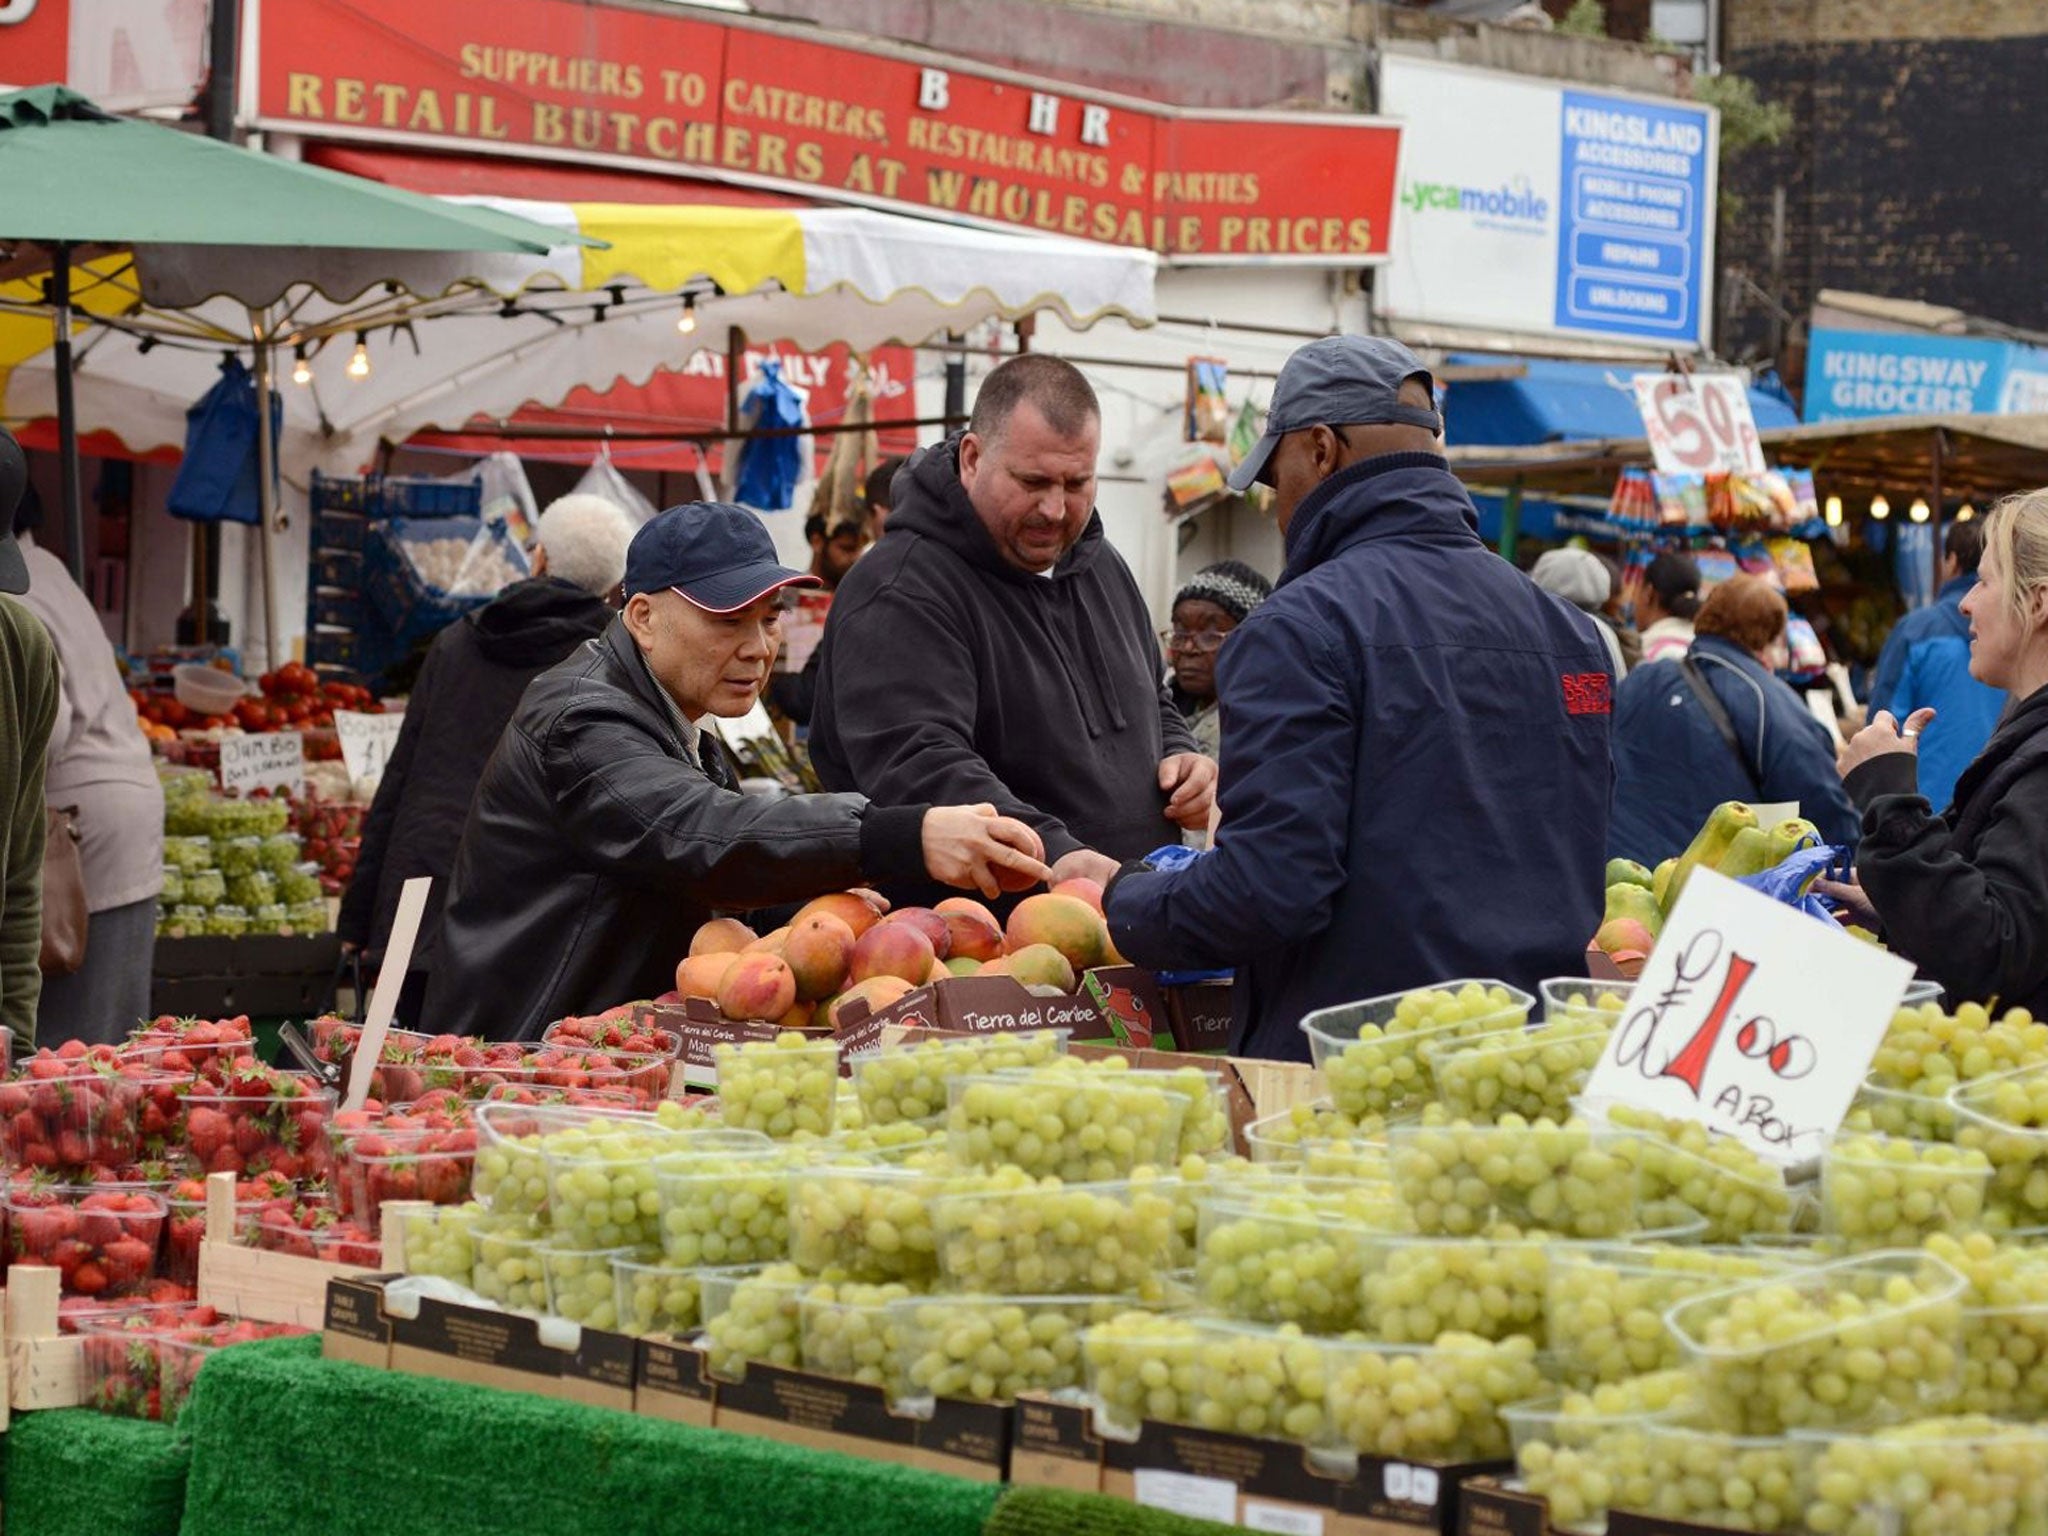 Ridley Road Market has long been one of the most affordable markets in Hackney